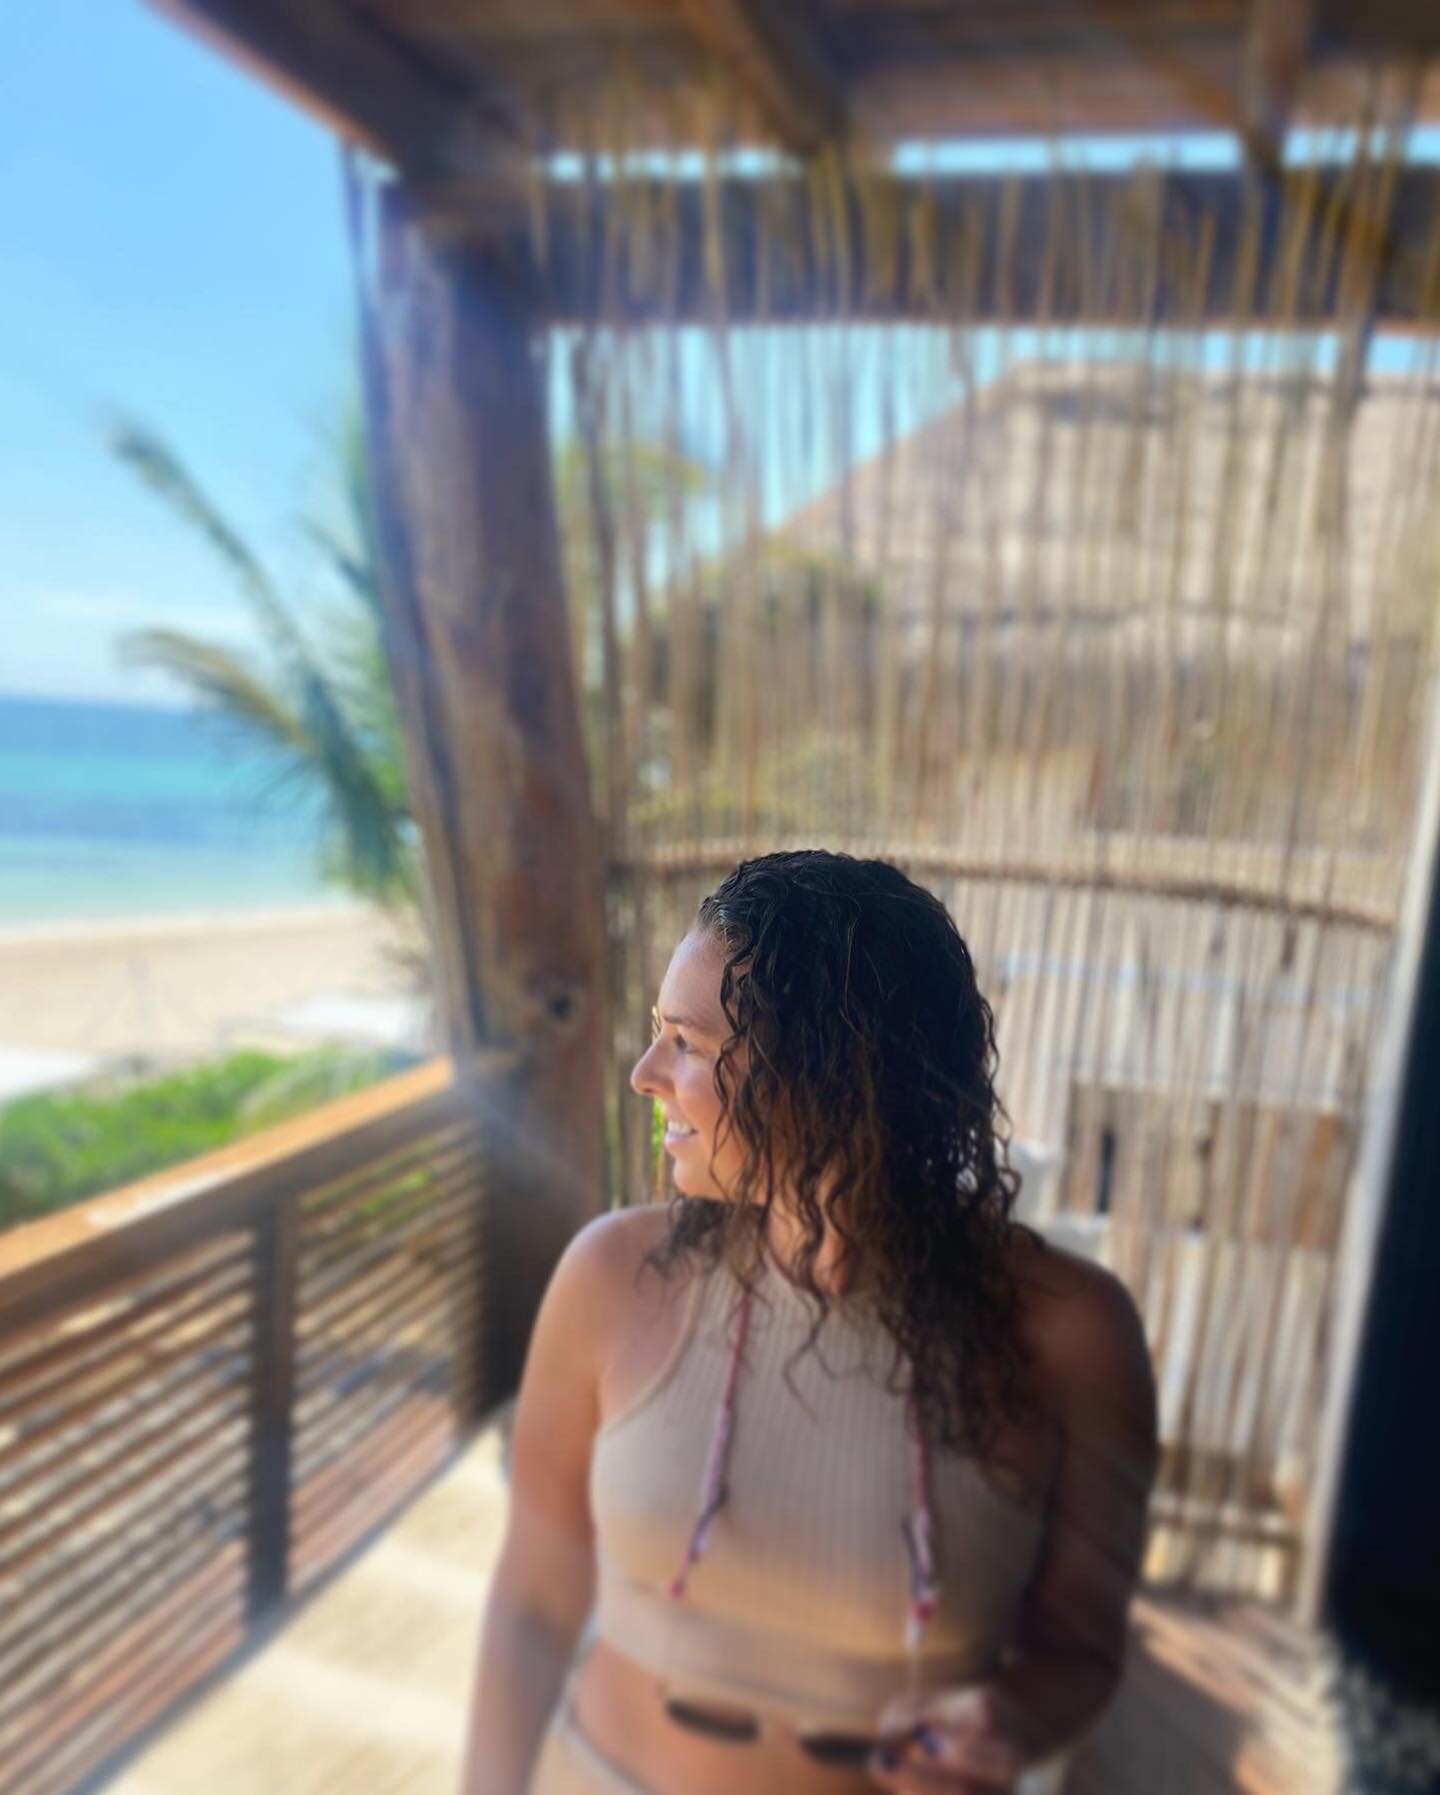 👁️ Tulum 👁️ The perfect place to wrap up the last of the 2022 retreats 🏝️ 💃🏻 🌞 🌊 Sand, Sea, Salsa and Sunshine. Yoga every morning with views of the ocean and the sound of the waves crashing on the shore. Nourishing foods, laughter, movement a